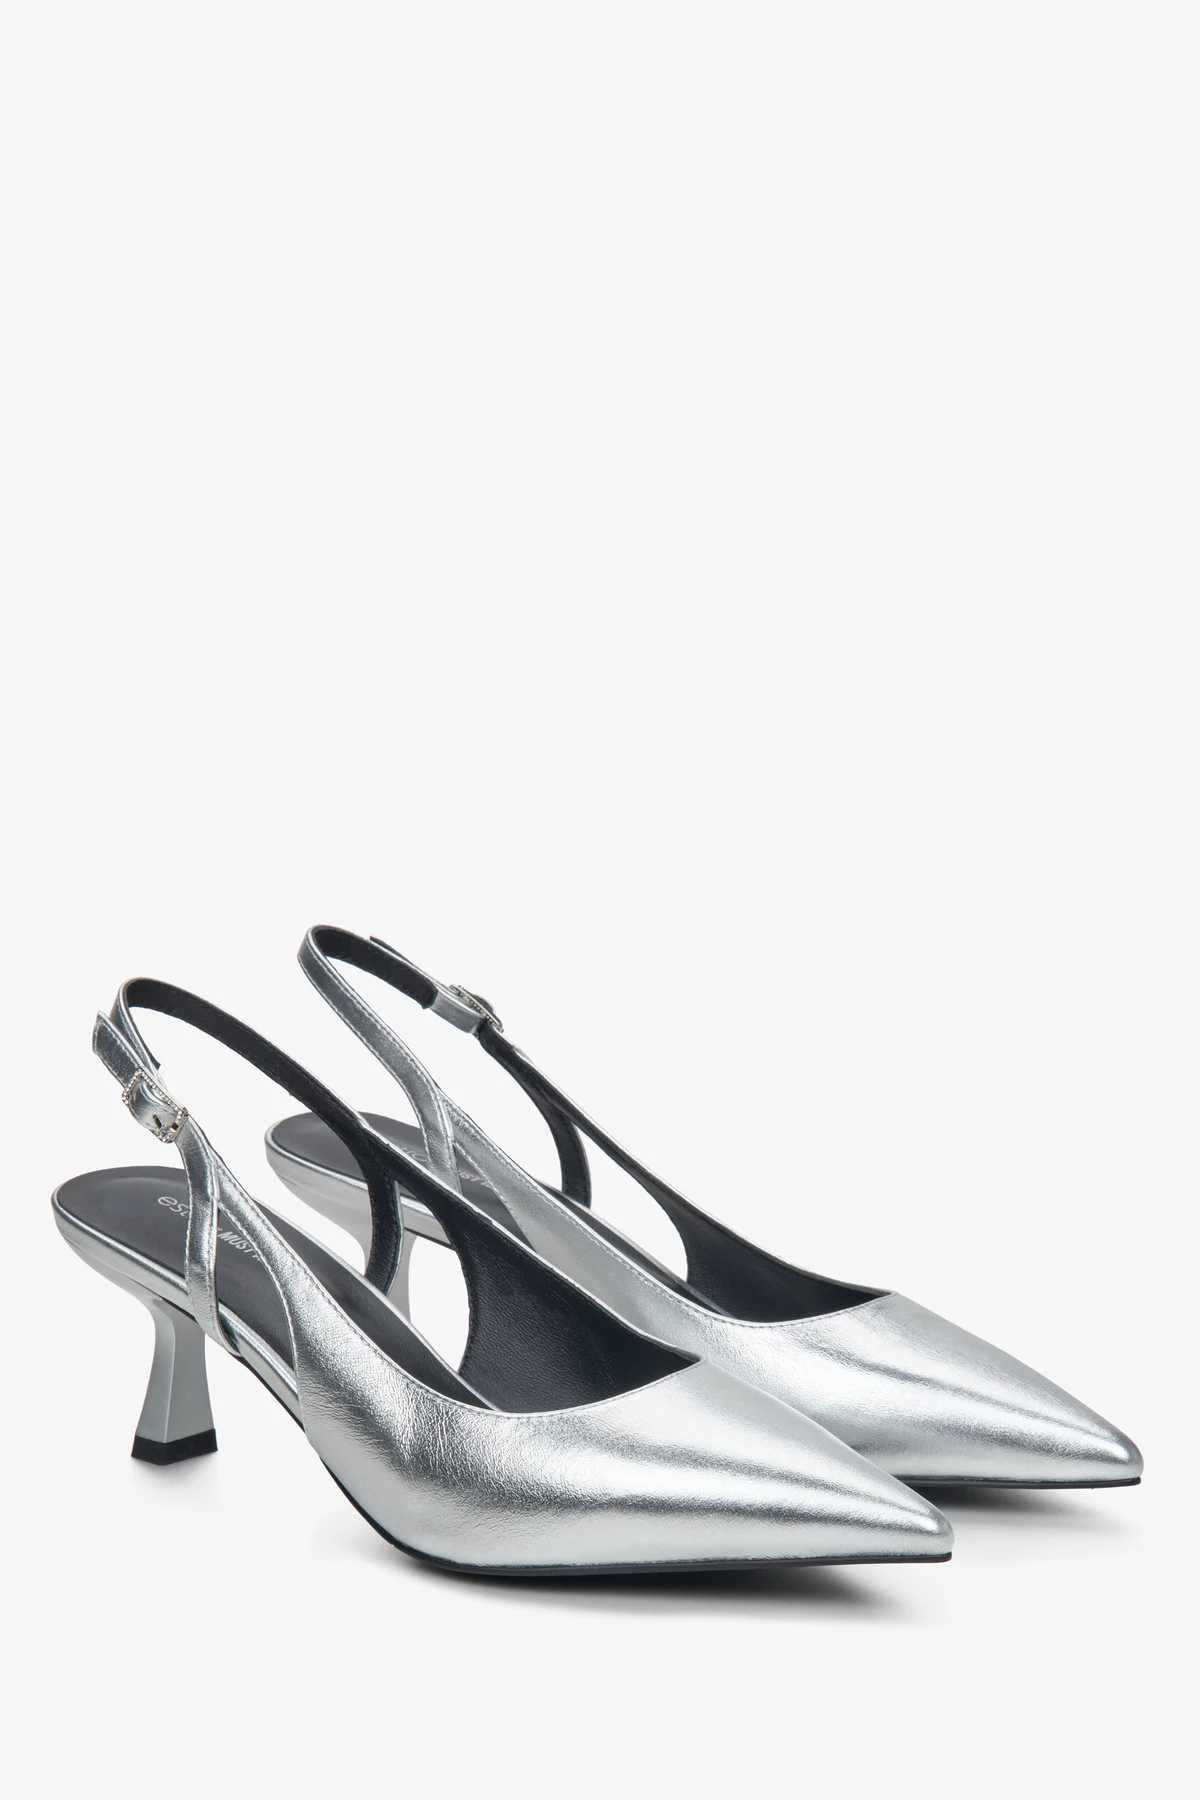 Silver leather slingbacks Estro x MustHave, photo 4